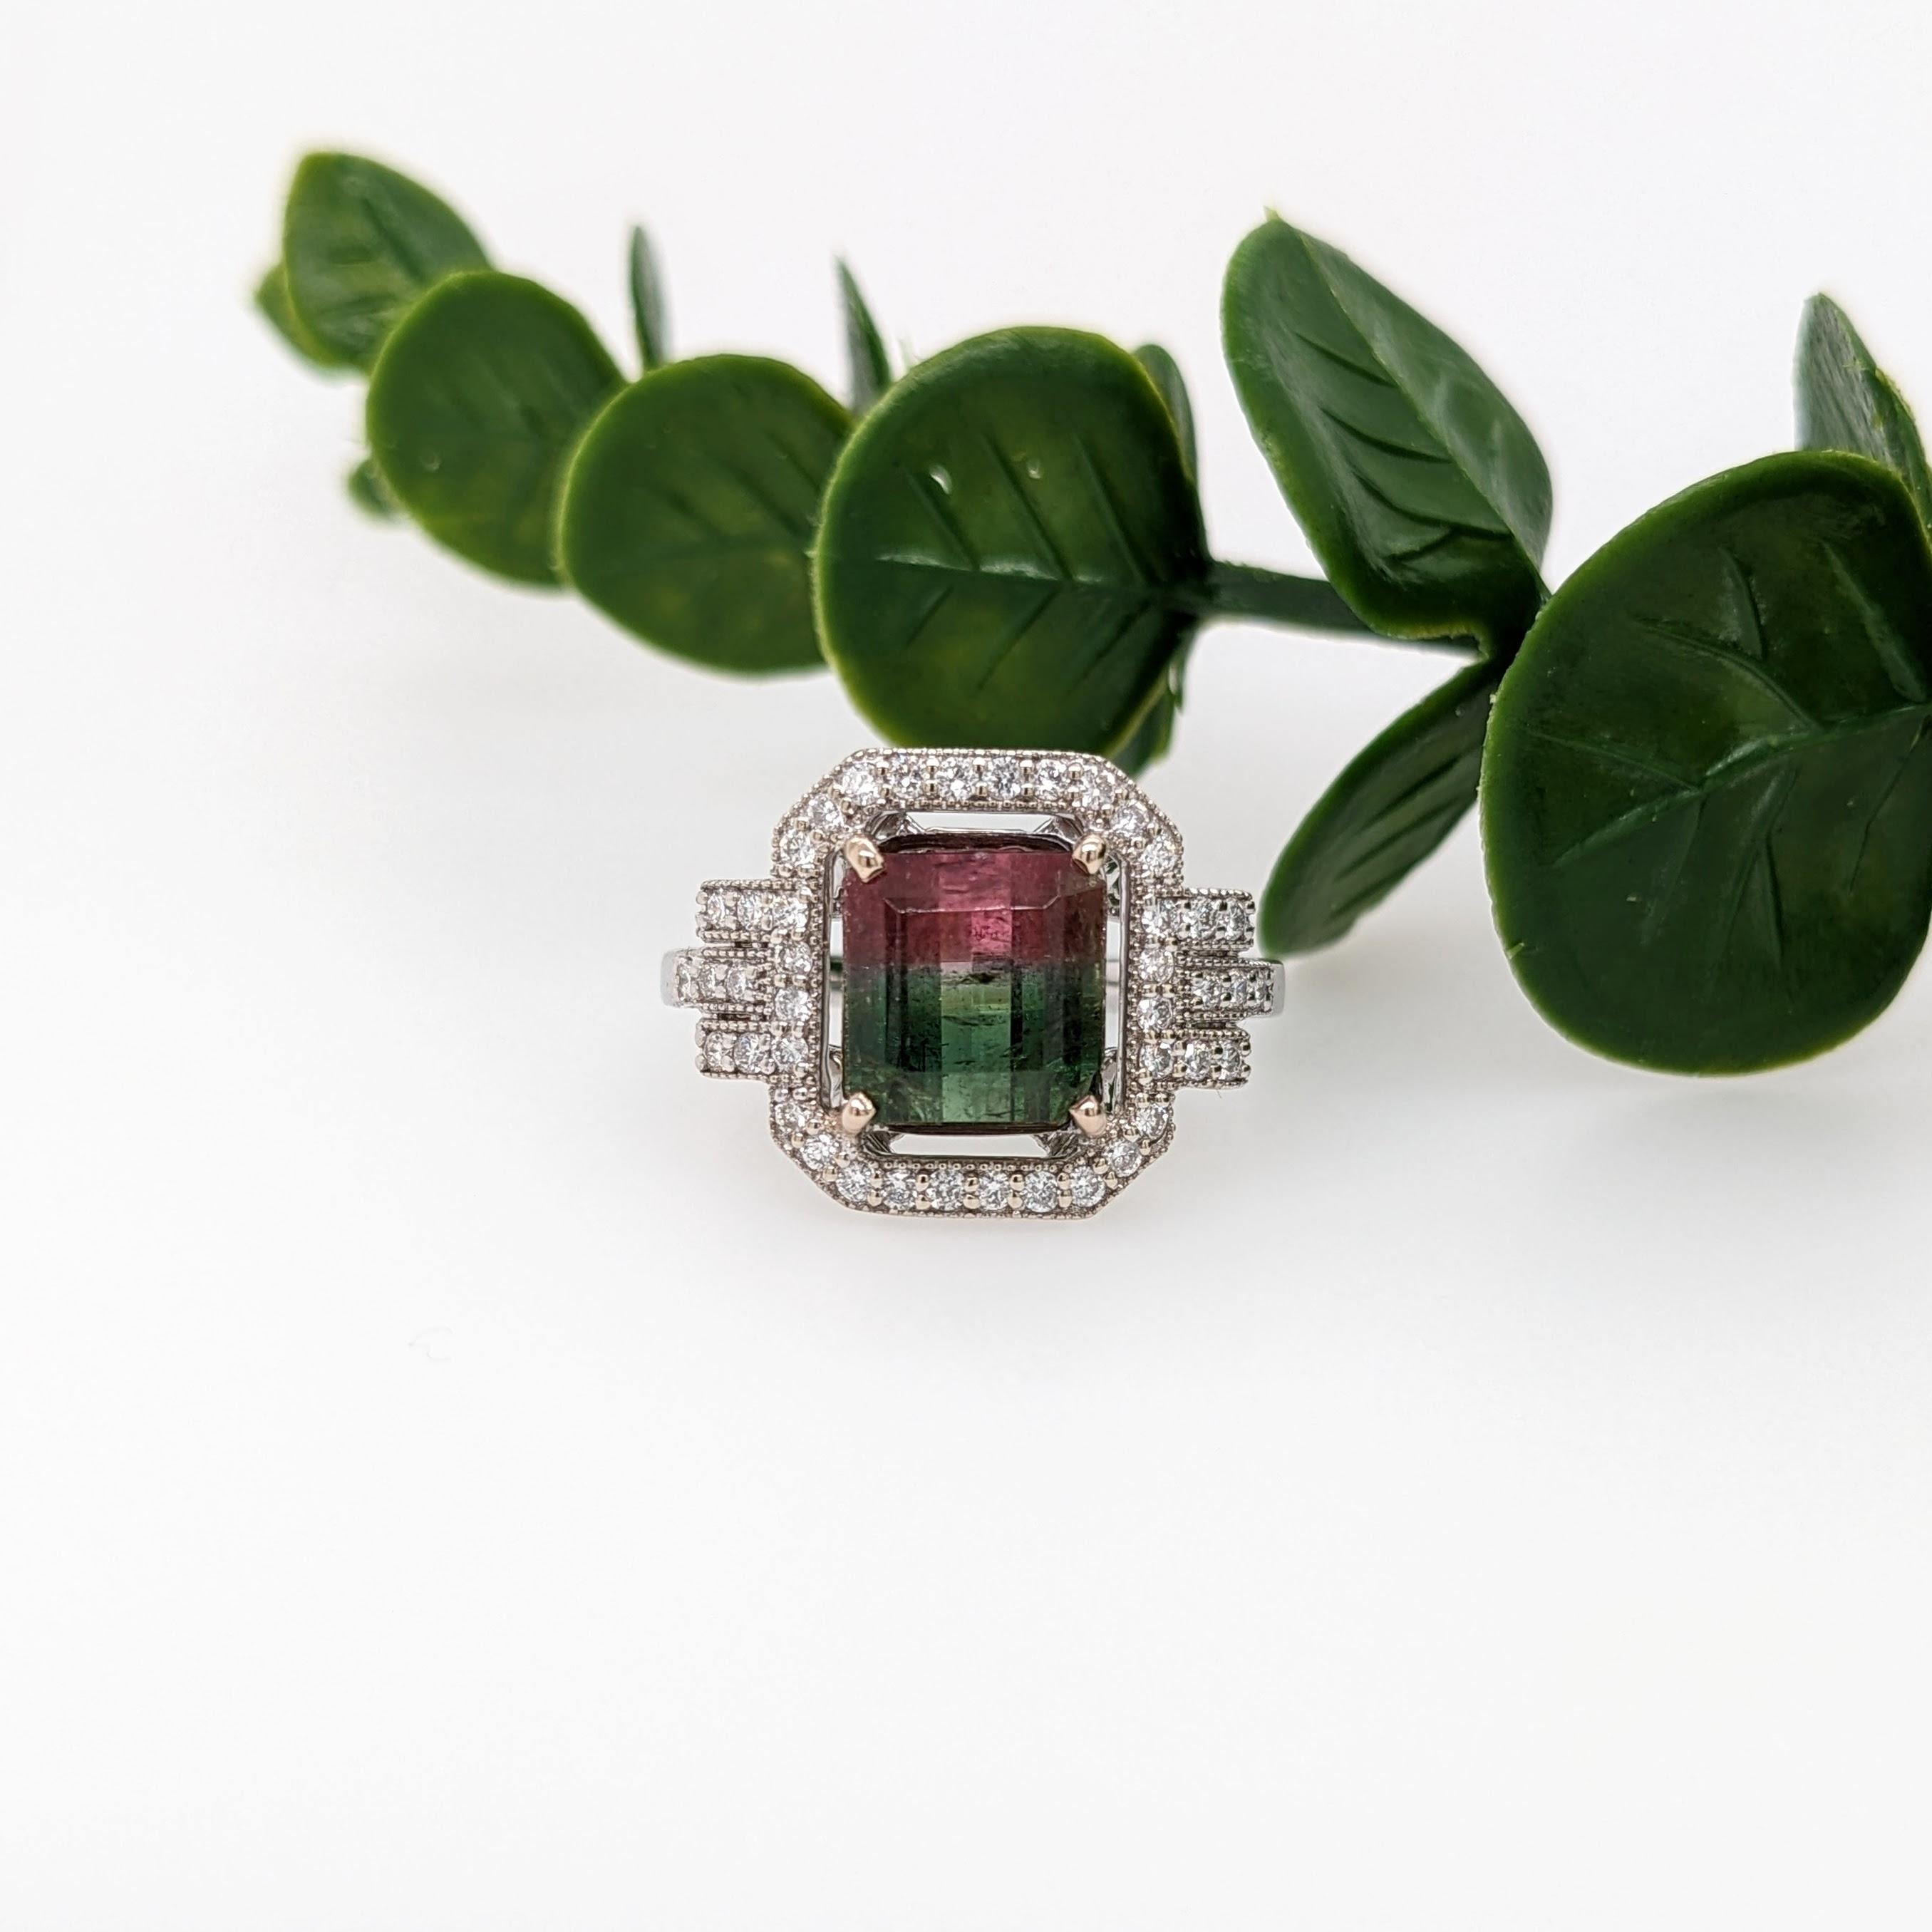 This ring features a beautiful pink and green watermelon tourmaline in a bold NNJ Designs ring setting with sparkling natural diamonds all set in 14k white gold. A gorgeous statement ring to showcase this unique stone!

Item Type: Ring
Center Stone: